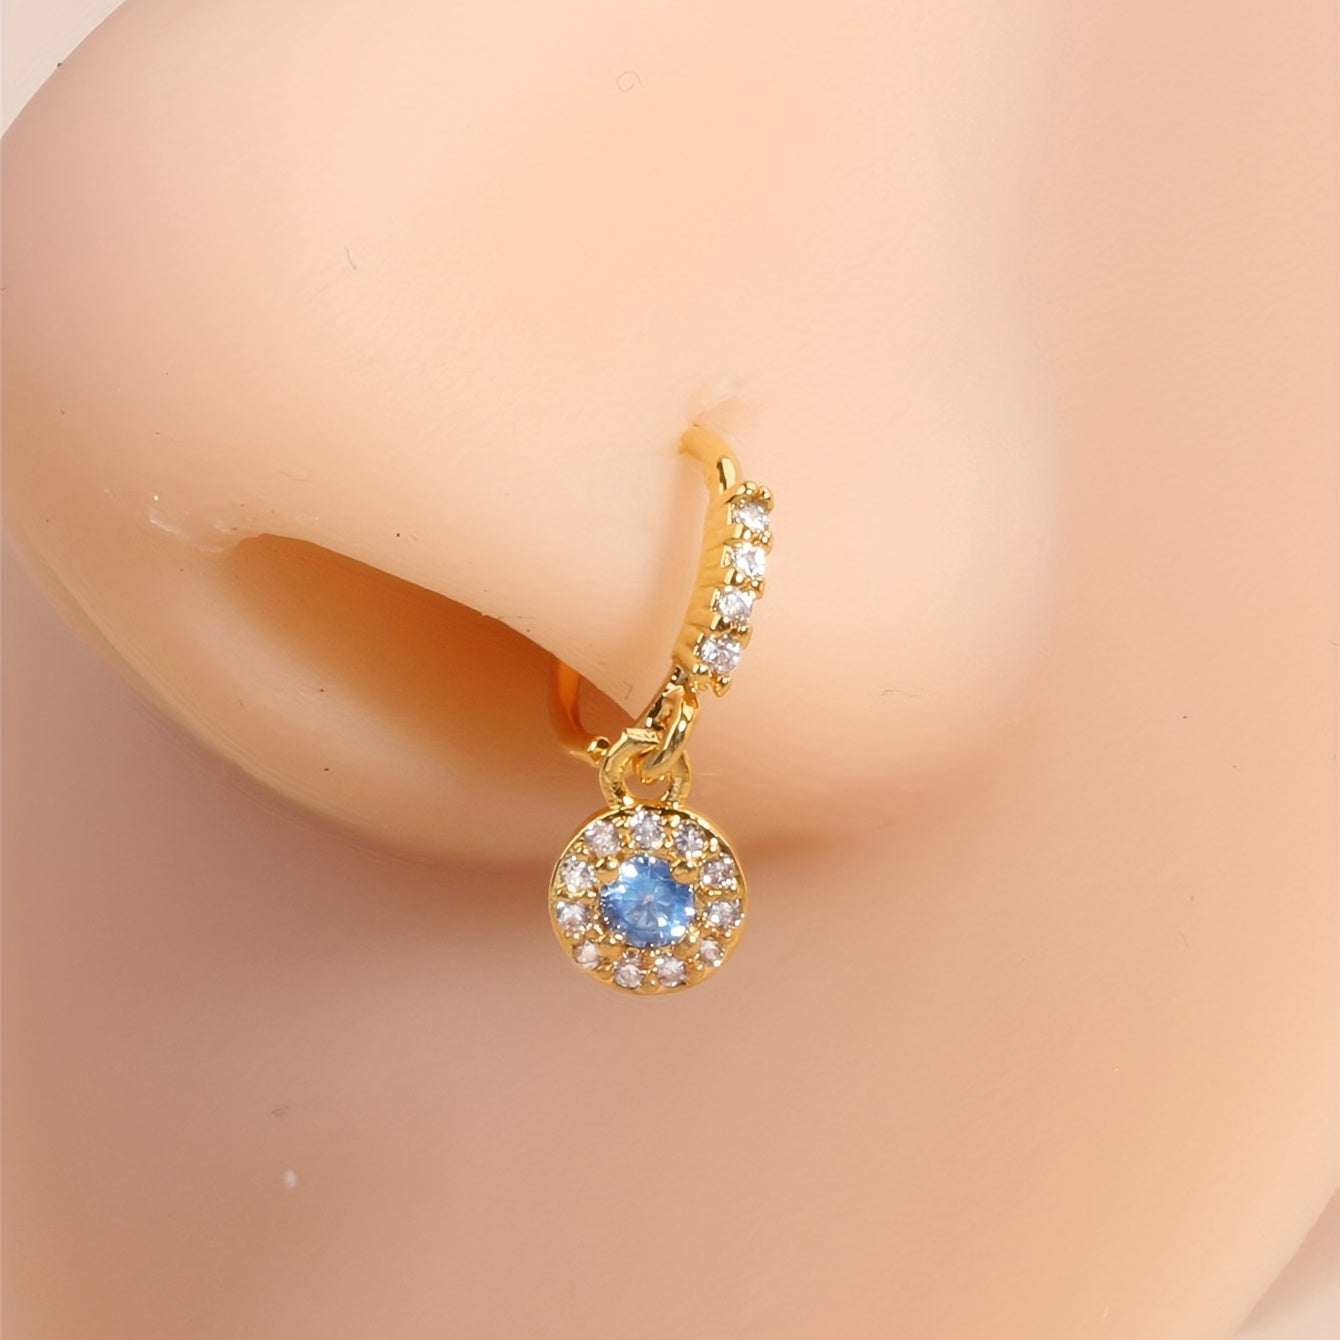 Add a Sparkle to Your Look with our Dangle Nose Ring Inlaid with Round Cut Shiny Zircon - Perfect for Women & Girls